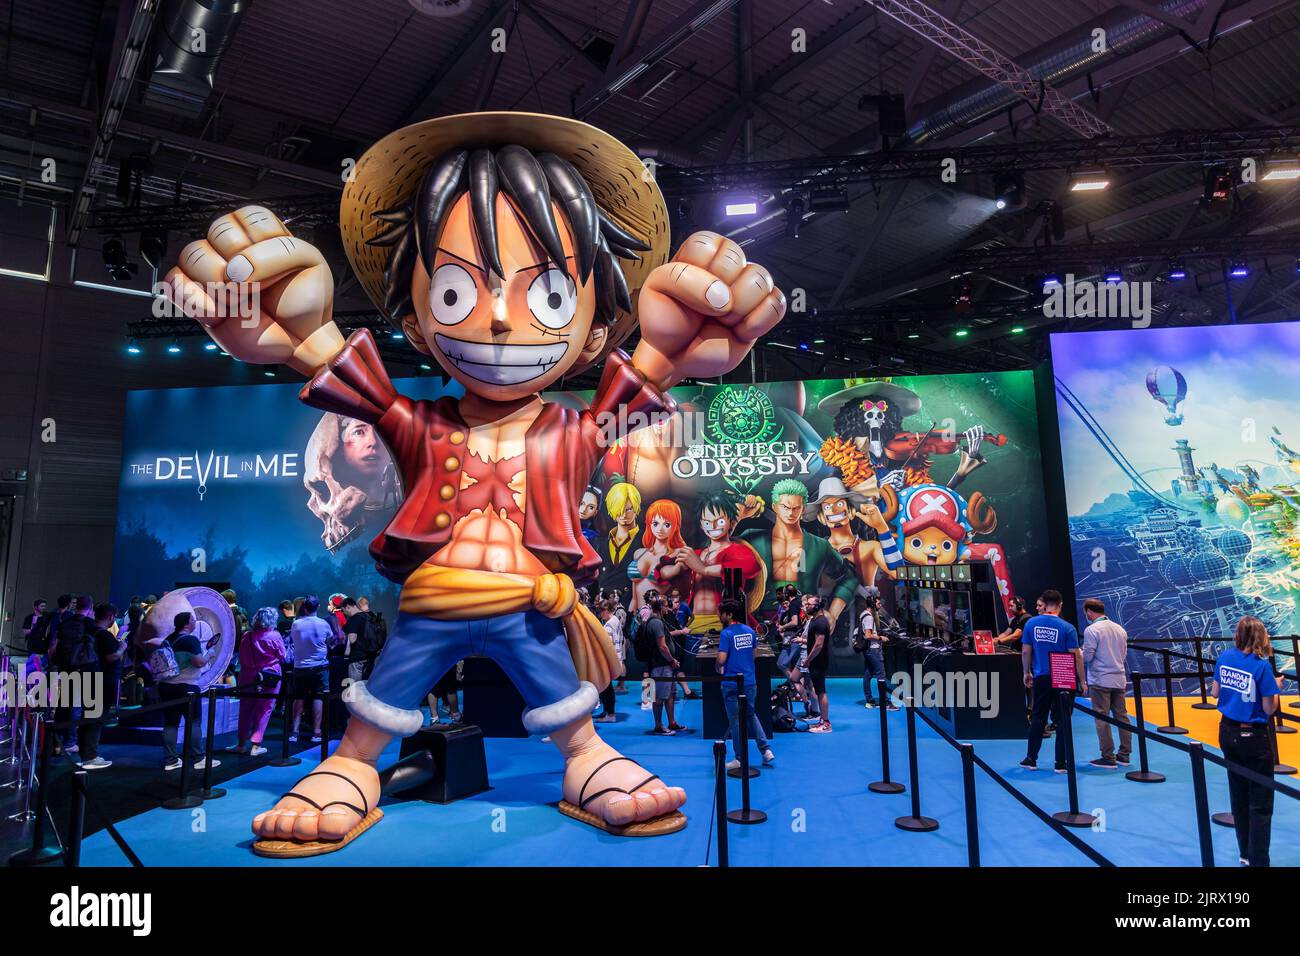 Cologne, Germany. 24th Aug, 2022. Gamescom 2022: Oversized figure of Monkey D. Luffy, fictional character and main protagonist of the 'One Piece' manga series, at the booth of Bandai Namco Entertainment, presenting role-playing video game One Piece Odyssey, developed by ILCA, published by Bandai Namco Entertainment. Gamescom is the world's largest trade fair for computer and video games, at Koelnmesse in Cologne, Germany. Photocredit: Christian Lademann / lademann.media Stock Photo